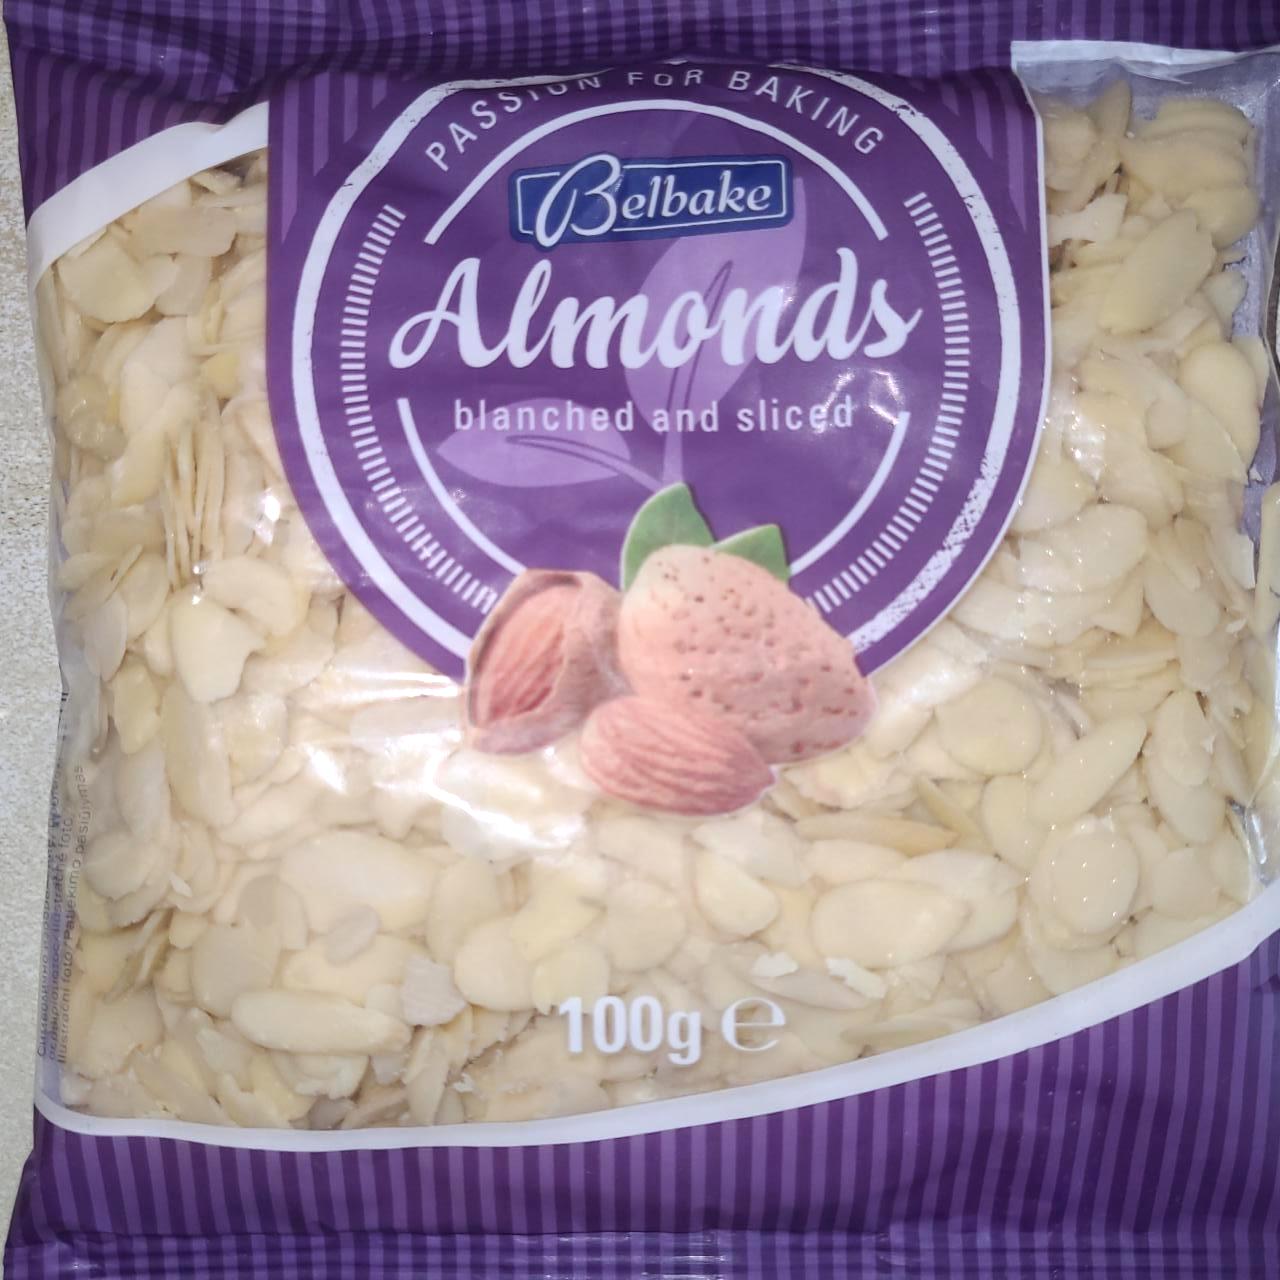 Képek - Almonds blanched and sliced Belbake